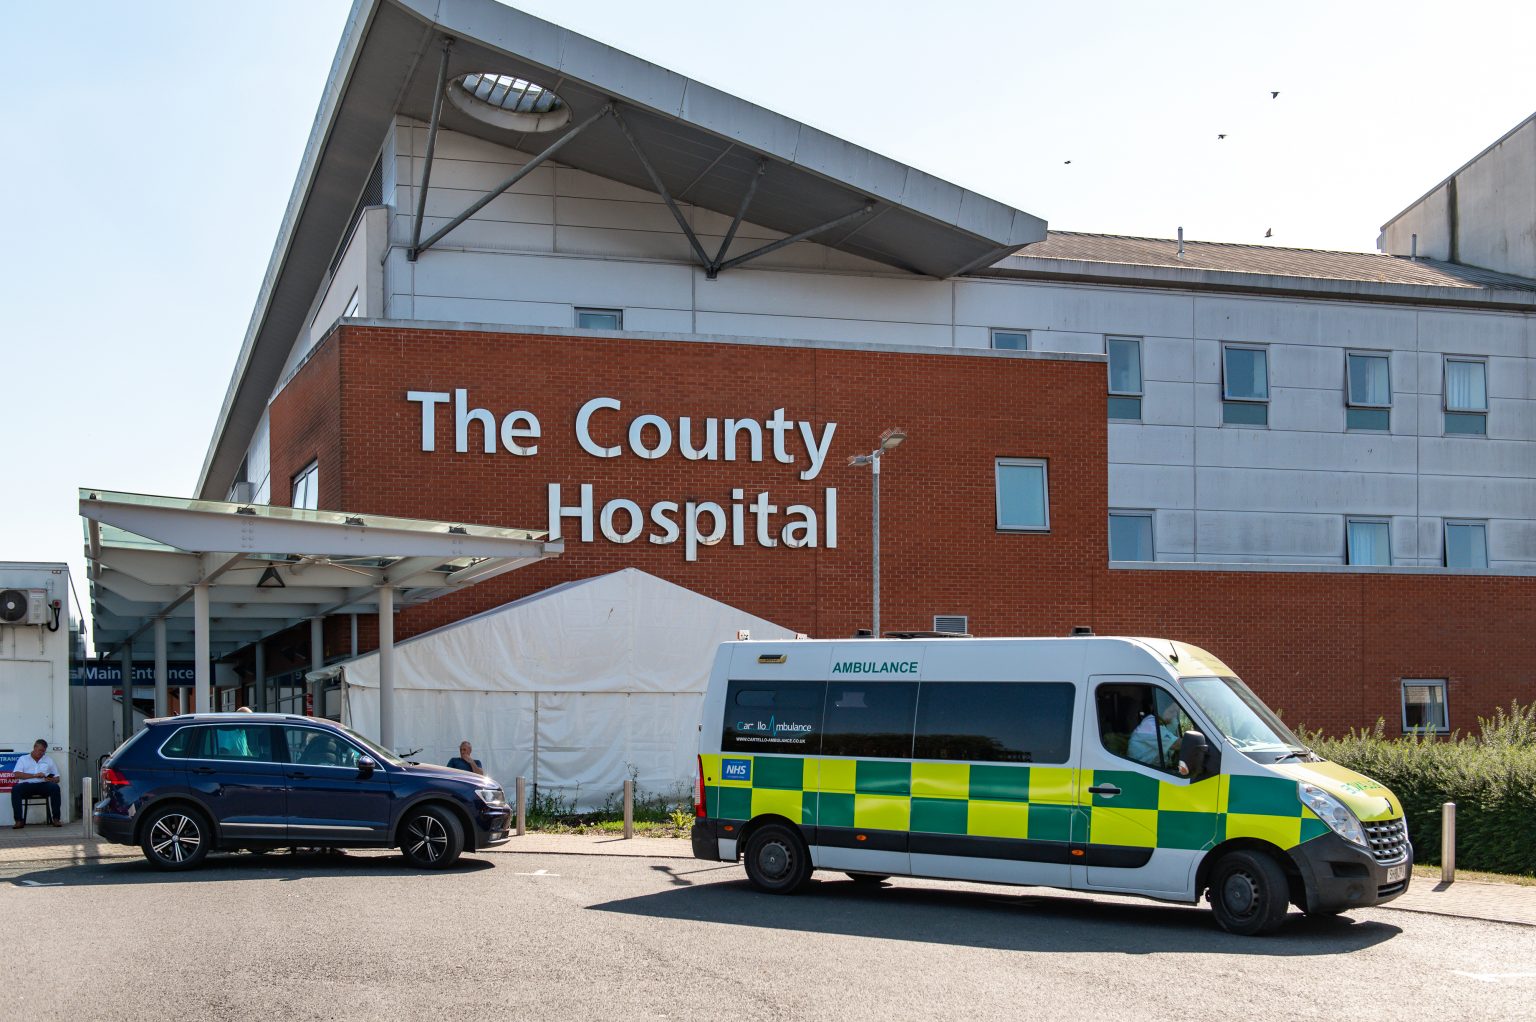 NEWS | Visiting restrictions still remain at hospitals with four areas of Hereford still recording ‘very high’ COVID infection rates